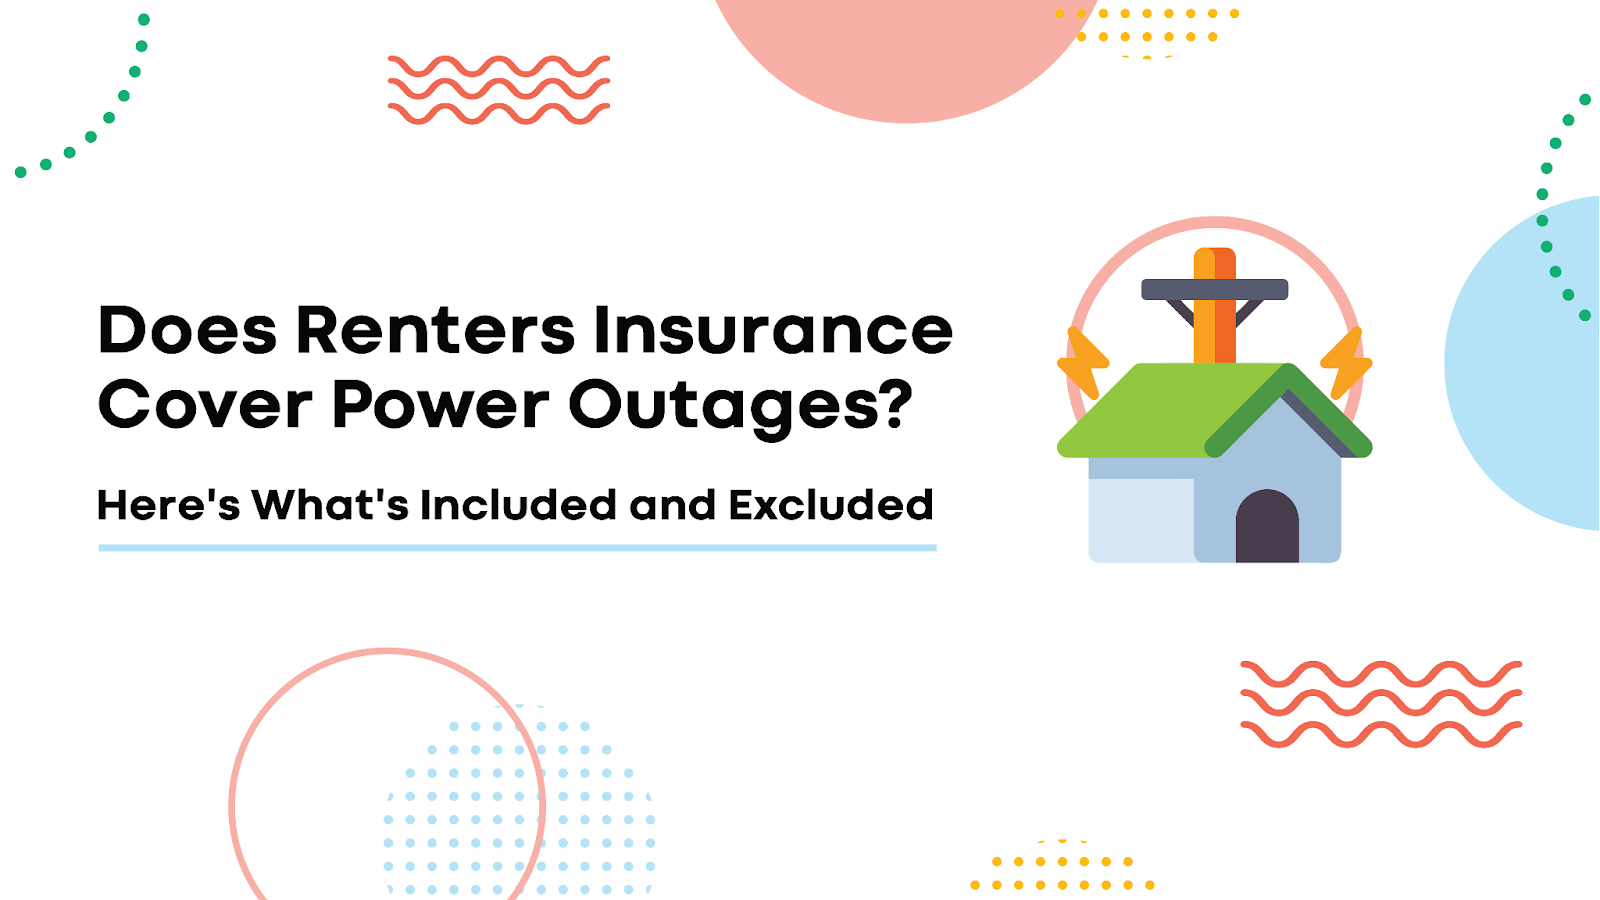 What are the covered losses in the event of a power outage?